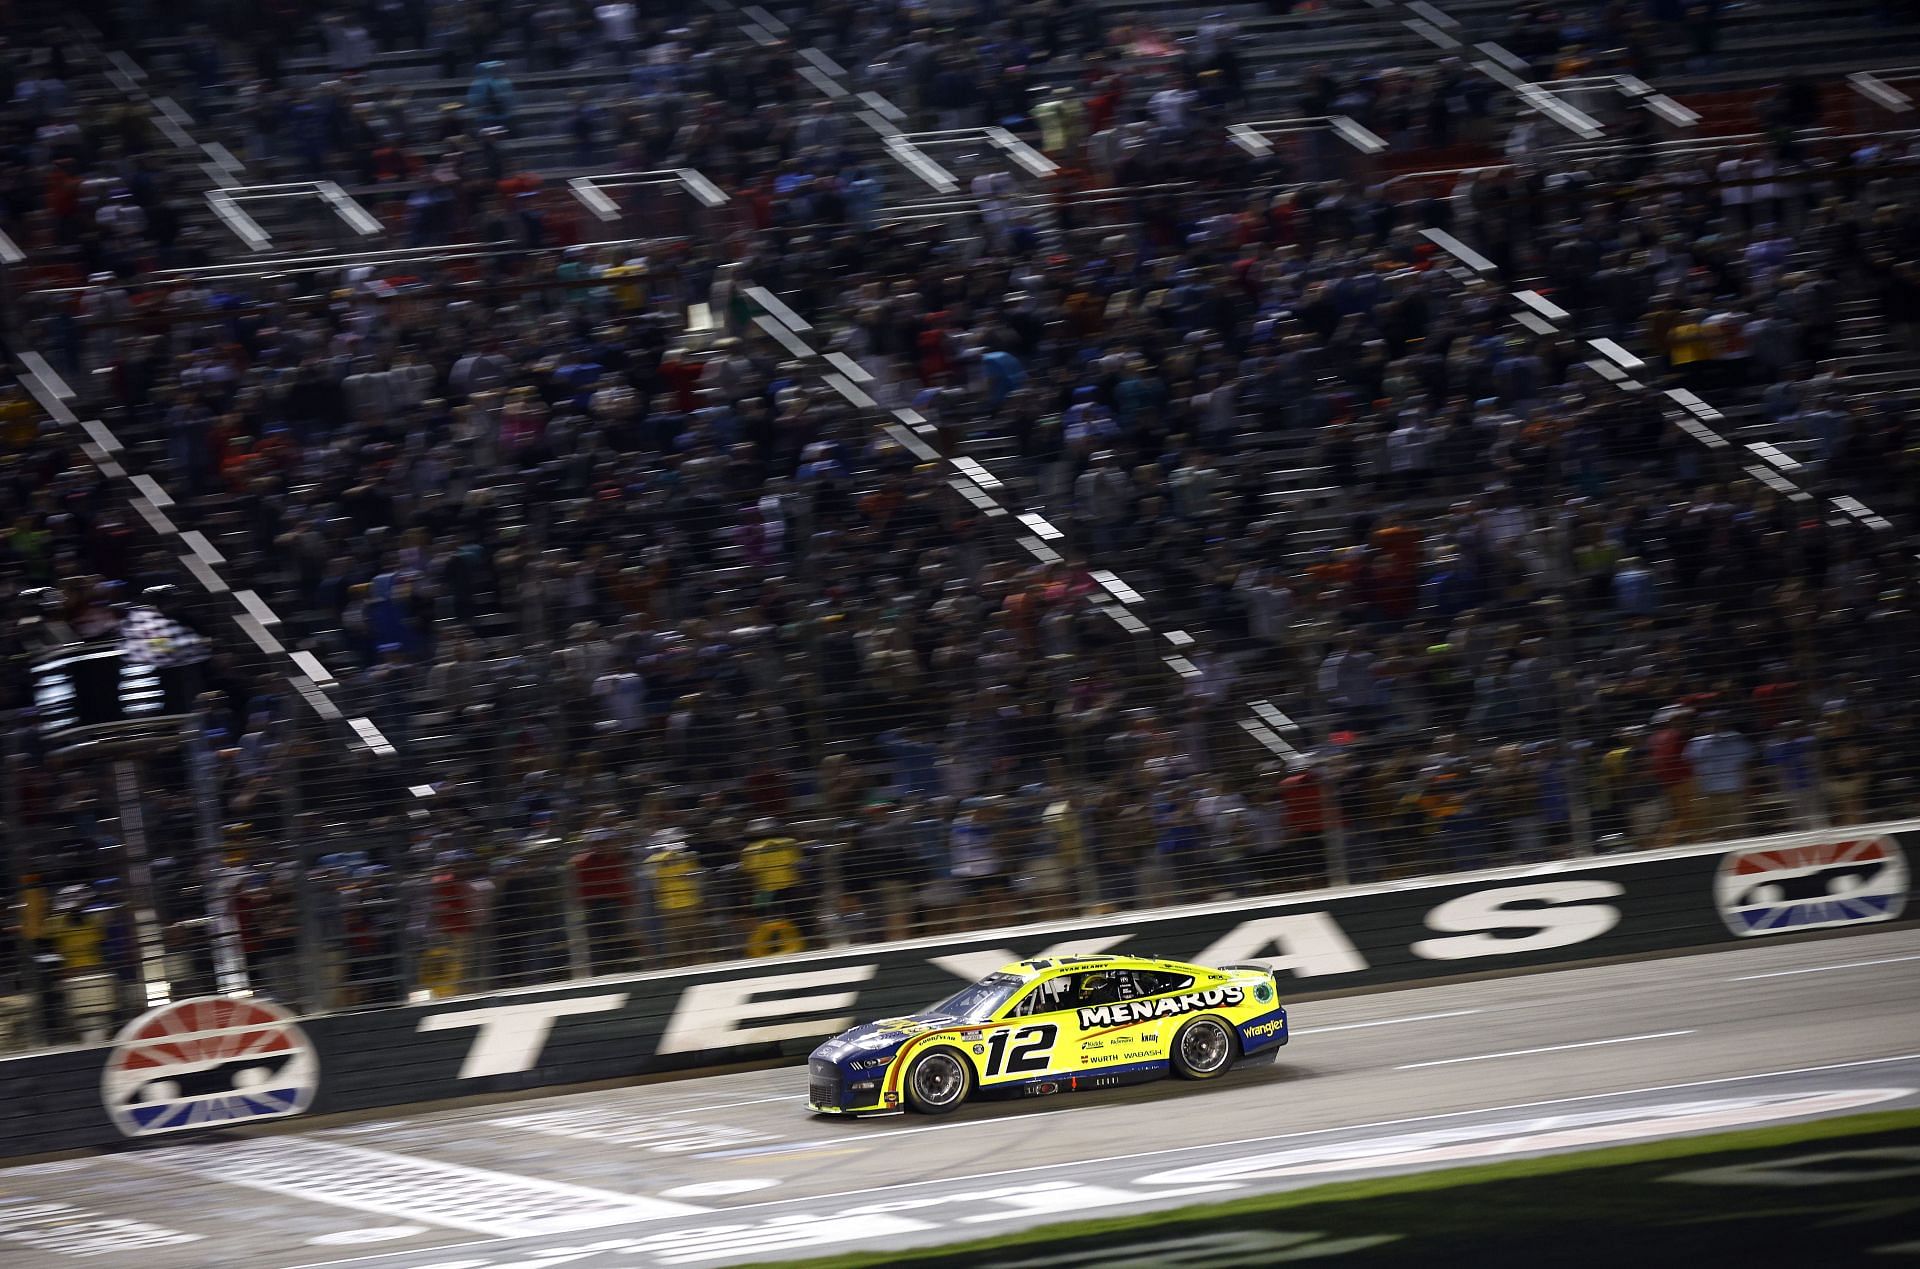 Ryan Blaney crosses the finish line to win the NASCAR Cup Series All-Star Race at Texas Motor Speedway (Photo by Jared C. Tilton/Getty Images)